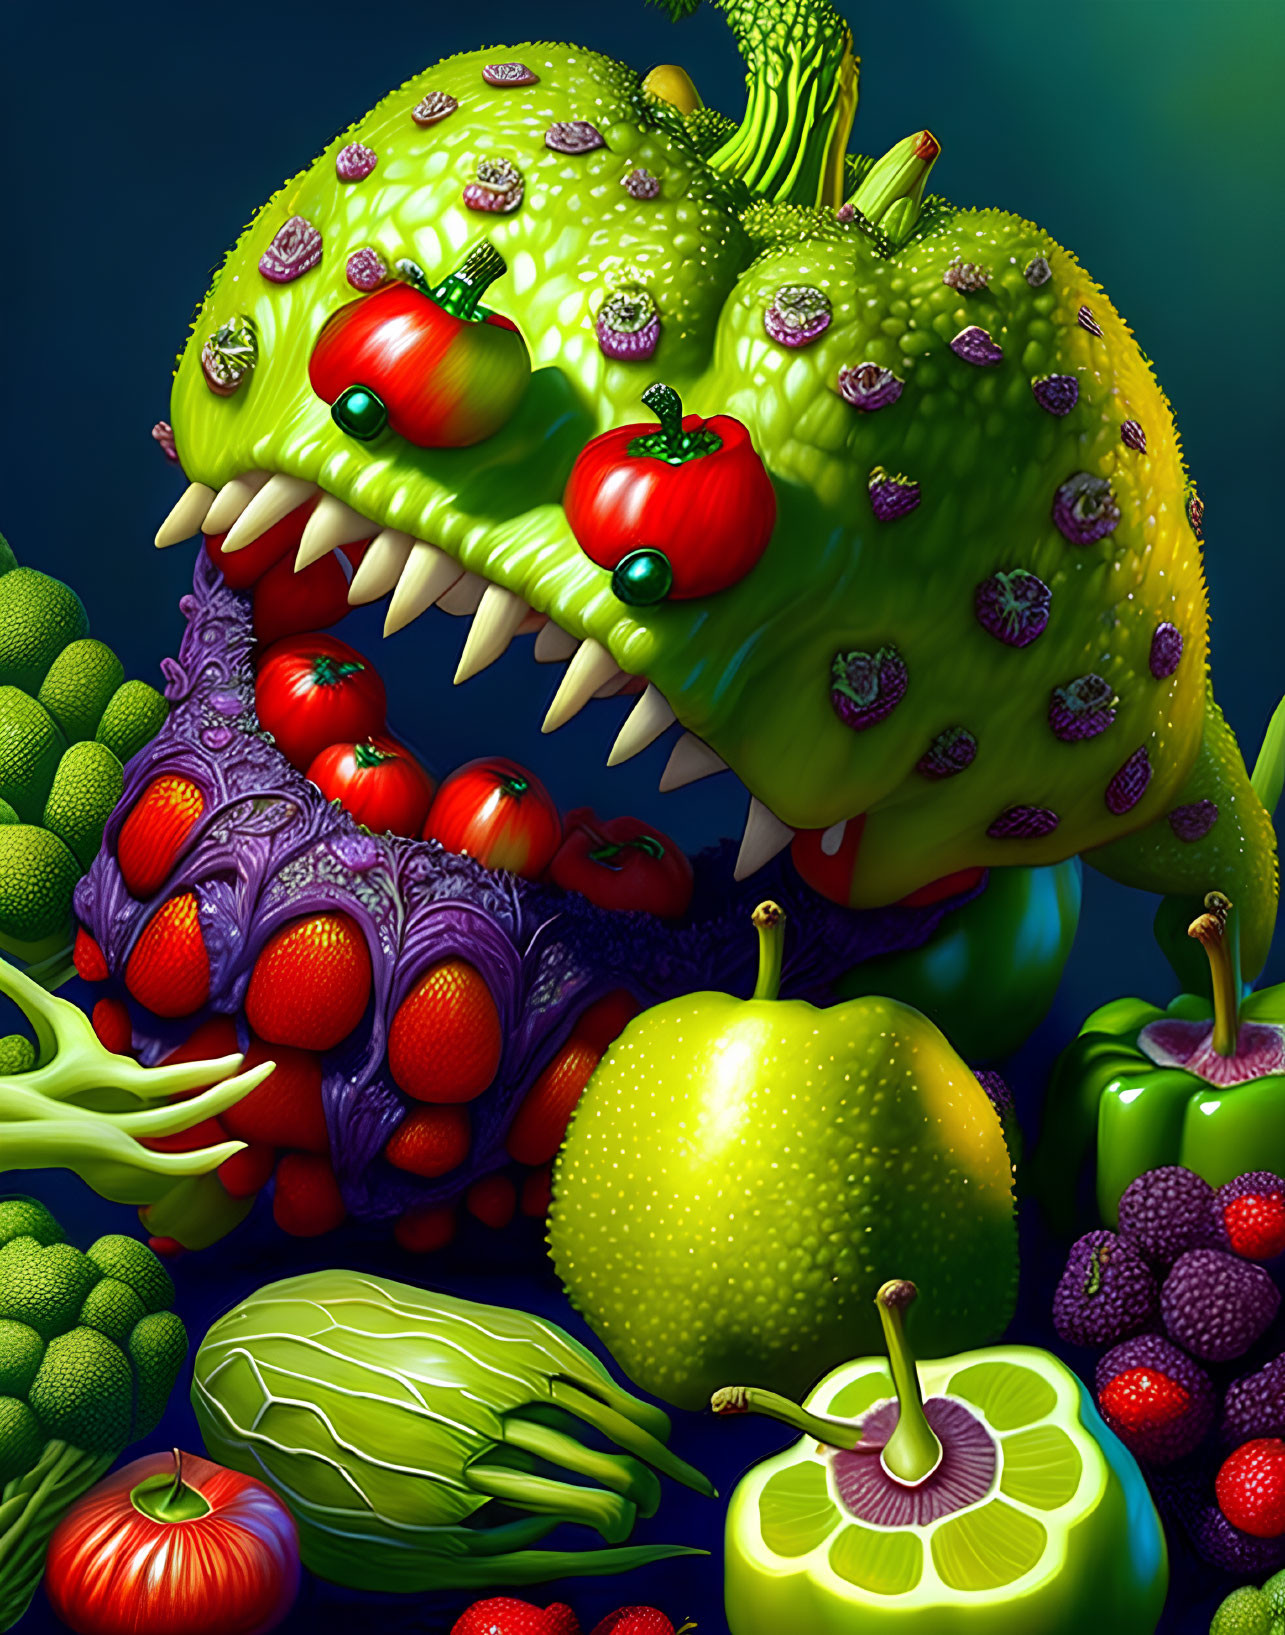 Colorful Monster Sculpture: Fruit and Vegetable Theme